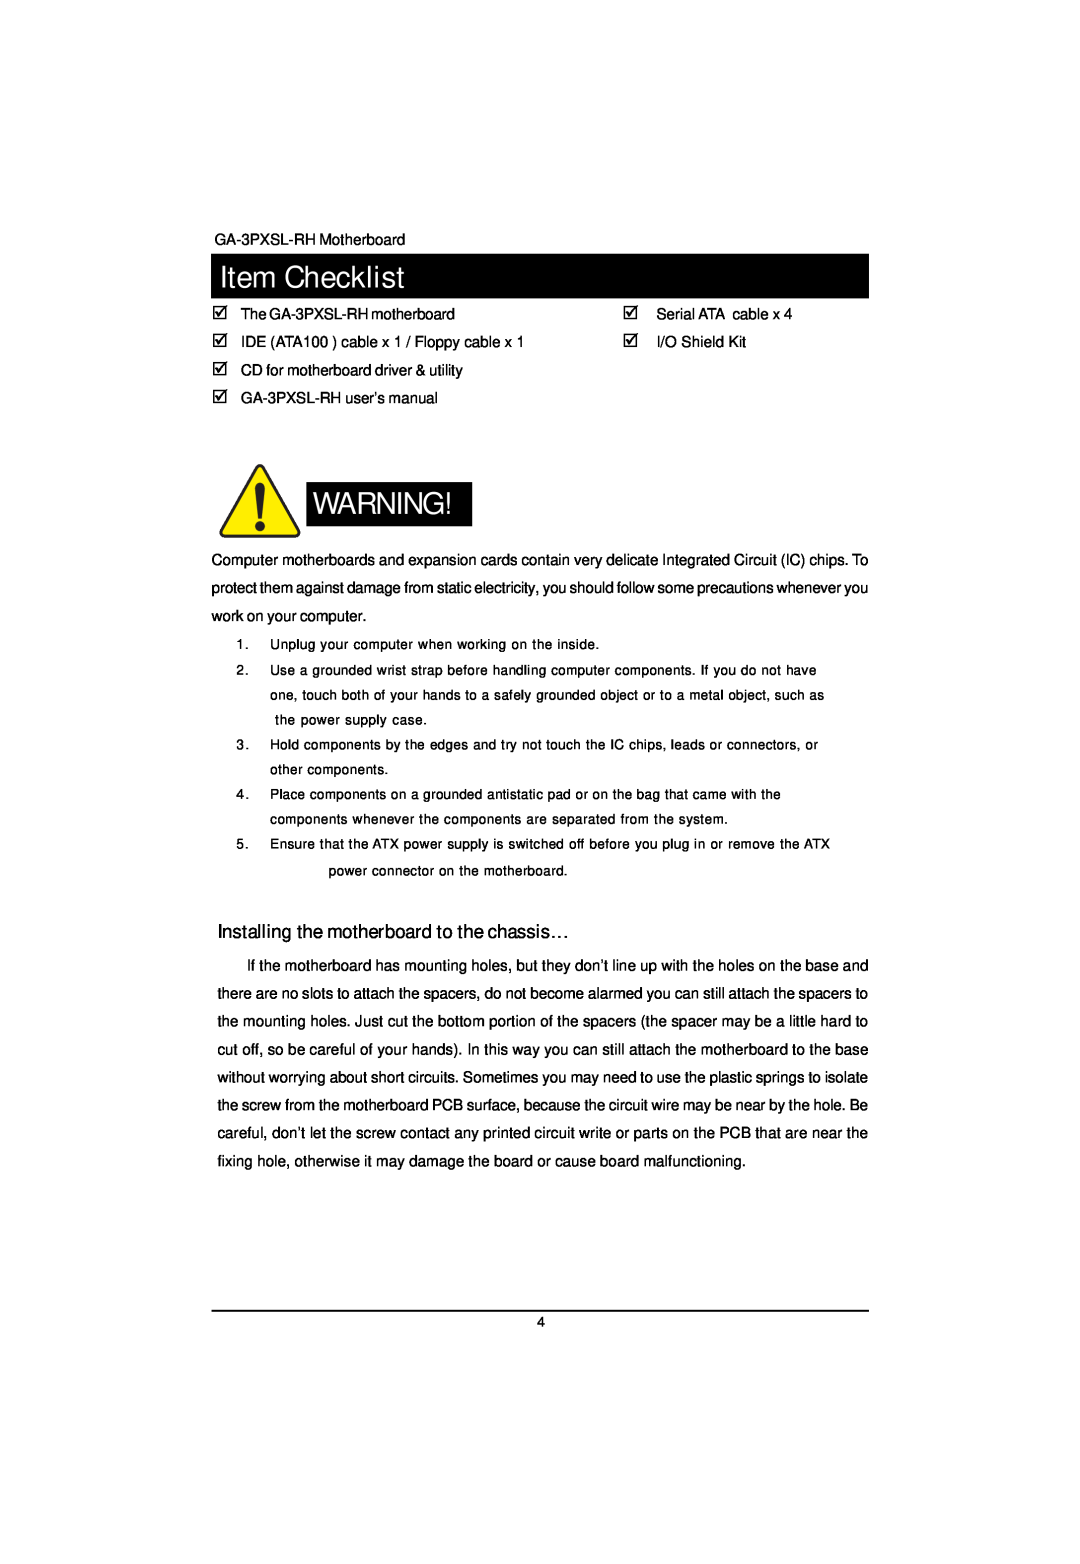 Gigabyte GA-3PXSL-RH user manual Item Checklist, Installing the motherboard to the chassis… 